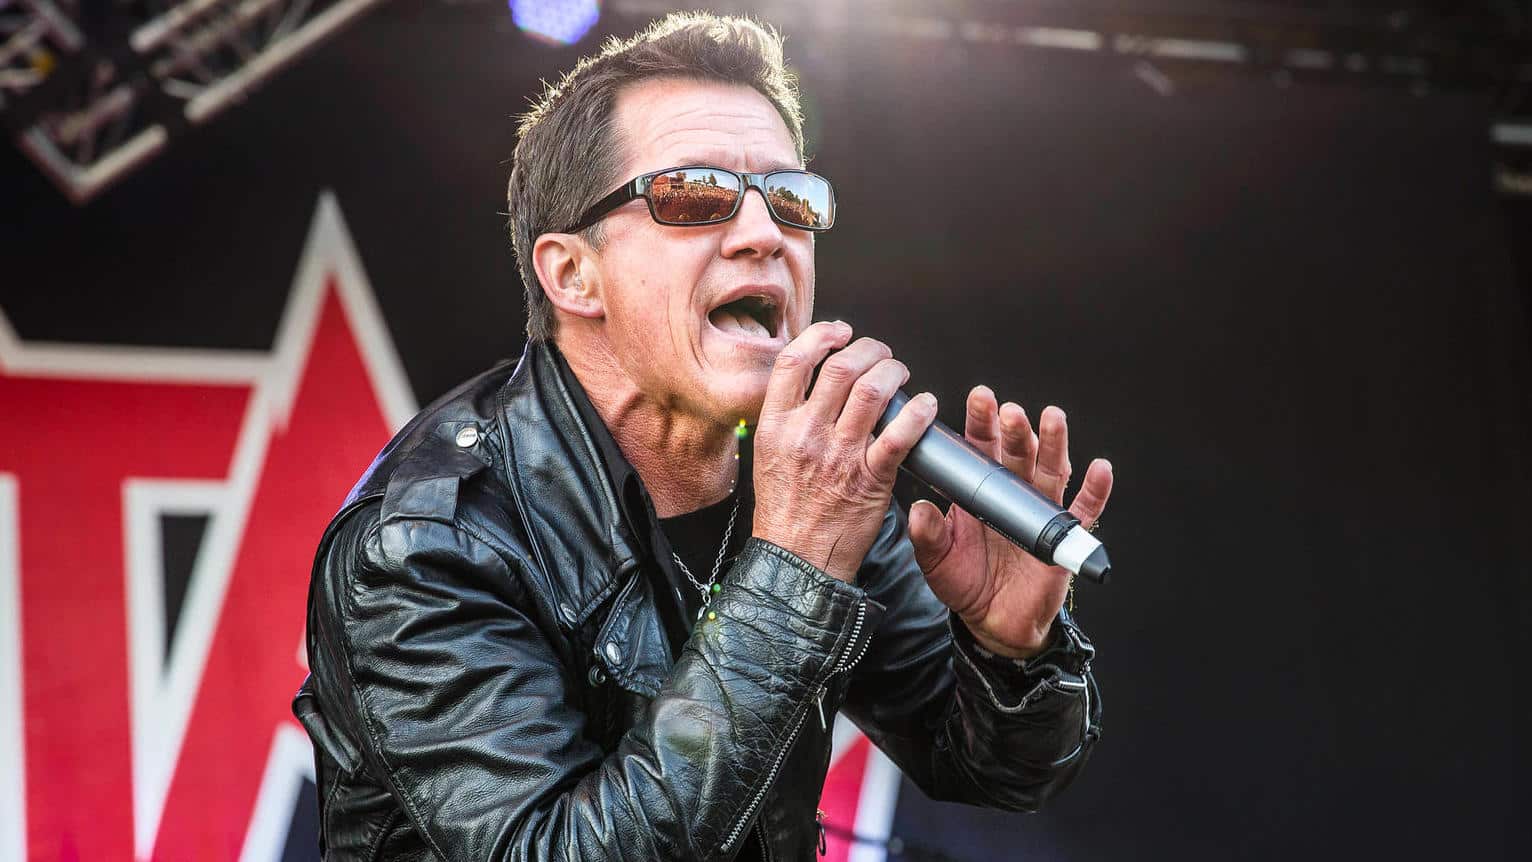 METAL CHURCH Vocalist MIKE HOWE’s Death Ruled A Suicide